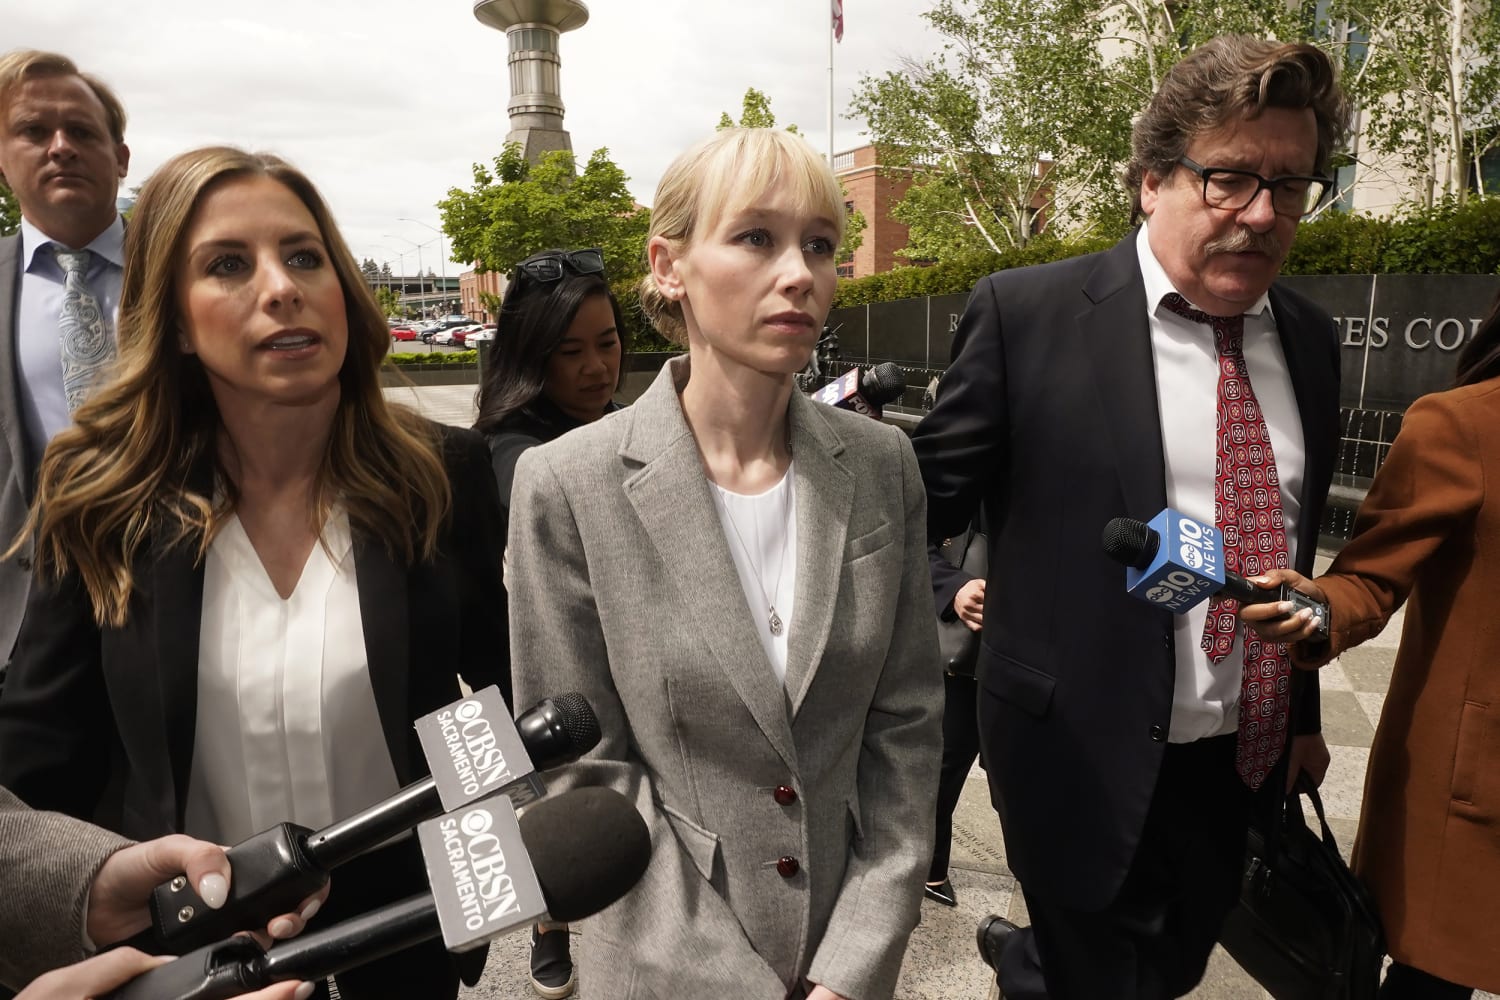 Sherri Papini, California woman who faked her kidnapping in 2016, pleads guilty to hoax